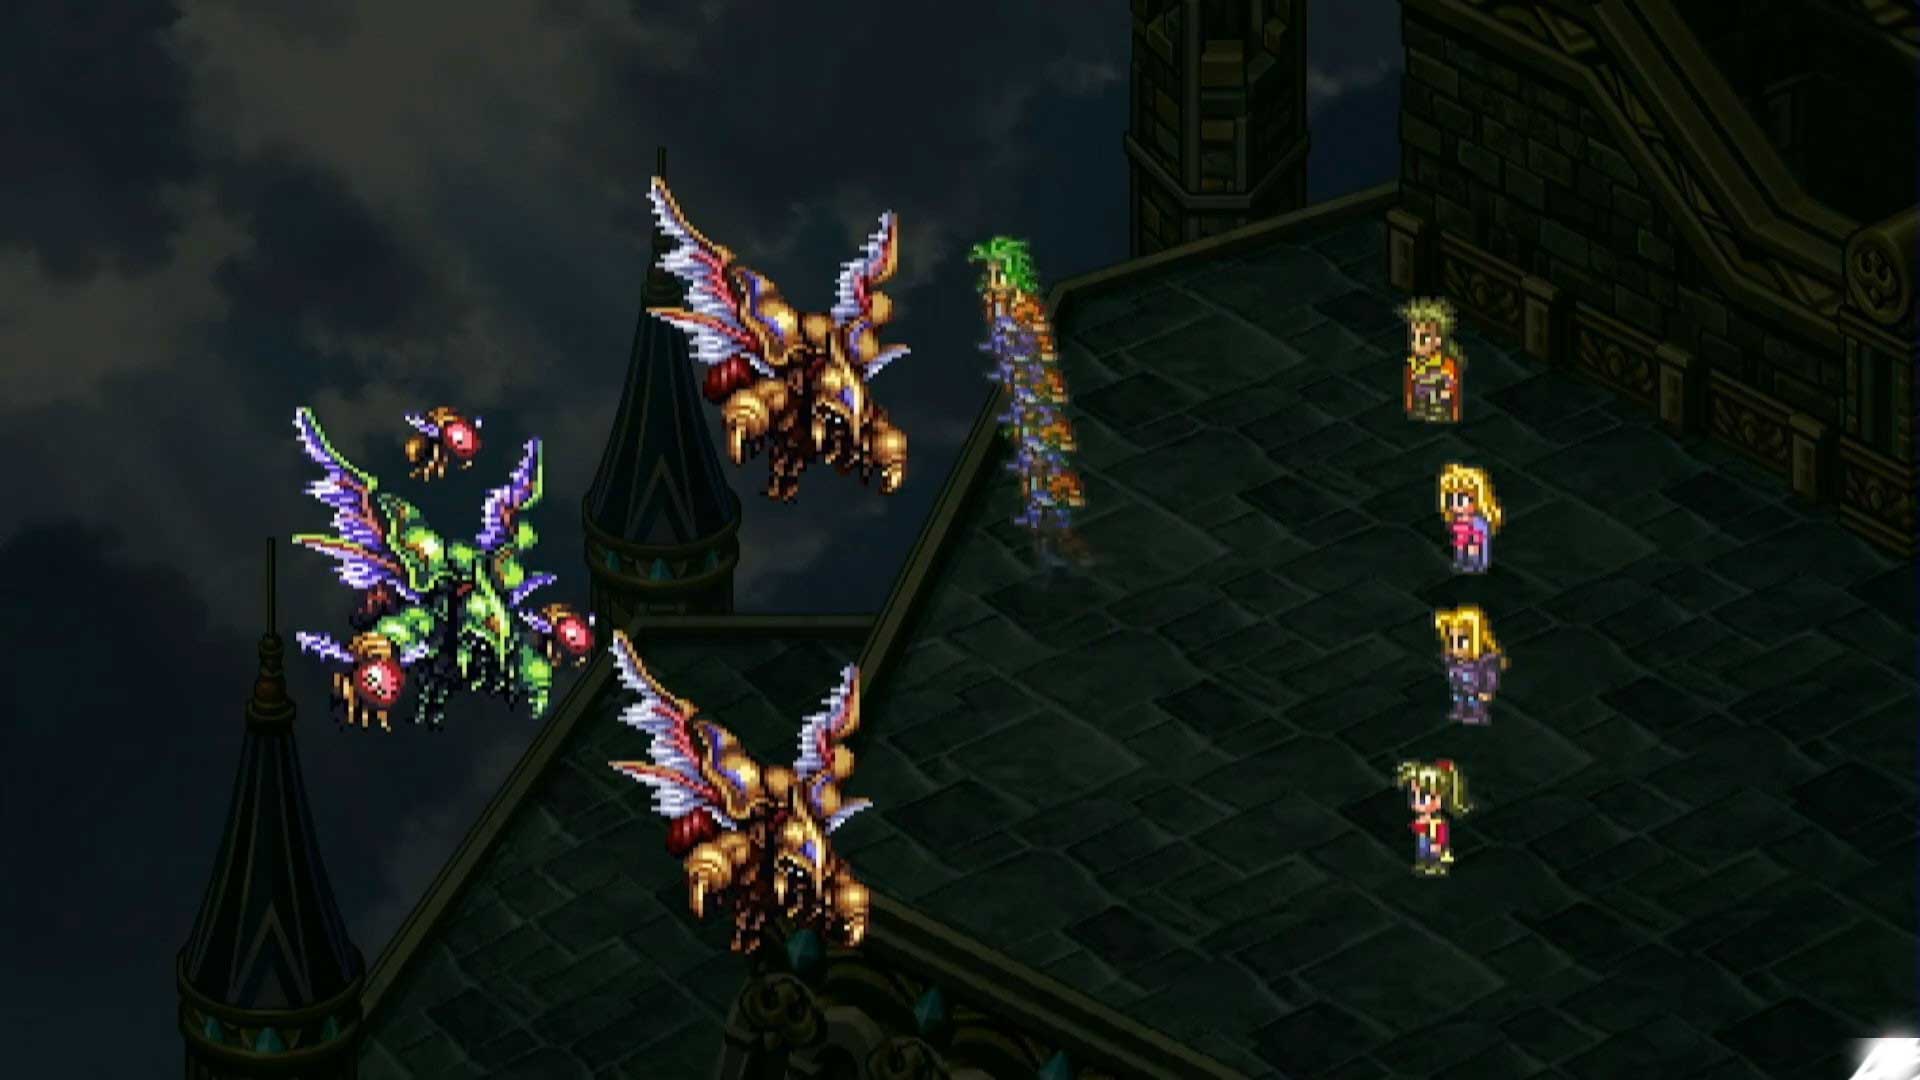 Romancing Saga 3, Romancing Saga 3 Remaster, Romancing Saga, PS4, PlayStation 4, release date, physical, physical release, Asia, Asia version, English, English release, Asia English release, multilanguage, Square Enix, Arc System Works